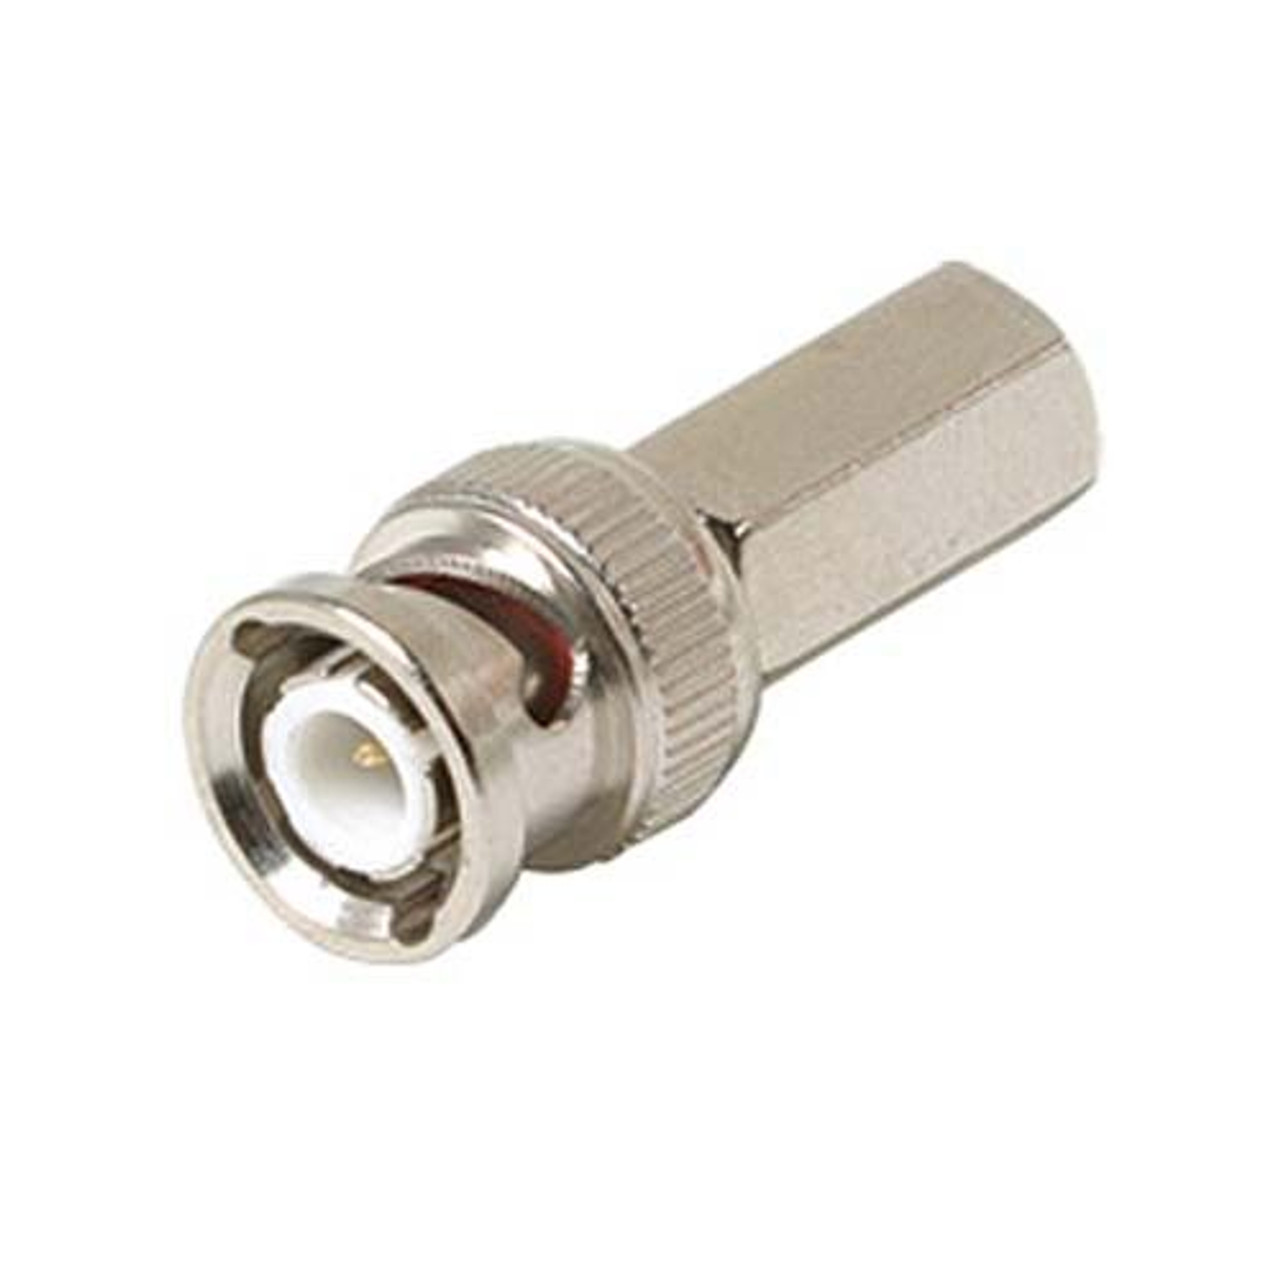 Eagle BNC Connector RG6 Twist-On Coaxial Cable Connector RG-6 Adapter Connector Audio Video Data Signal Component Device Communication 10 Pack